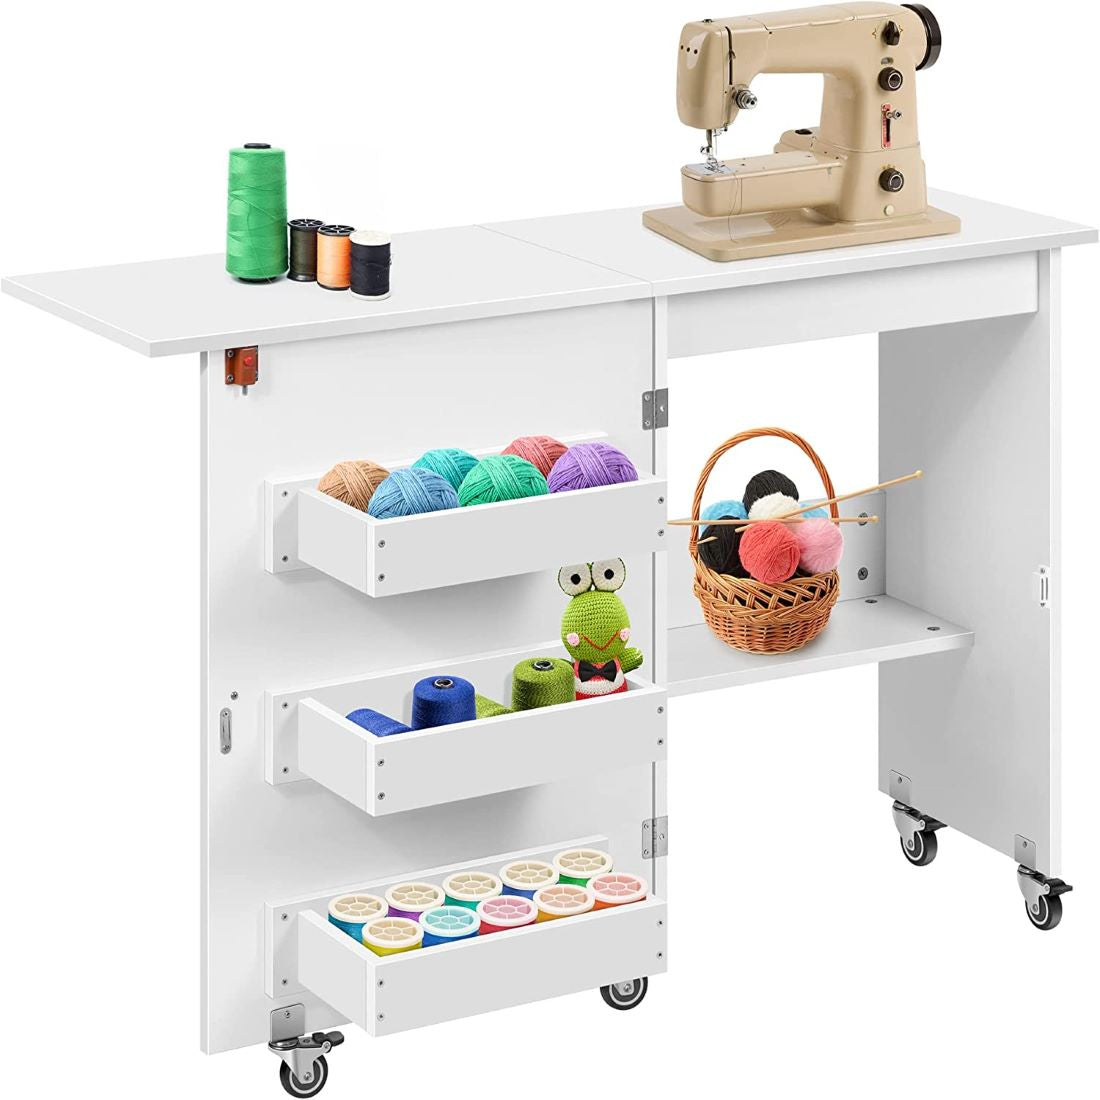 Sewing Craft Table, Art Desk with Storage Shelves and Lockable Casters,  White